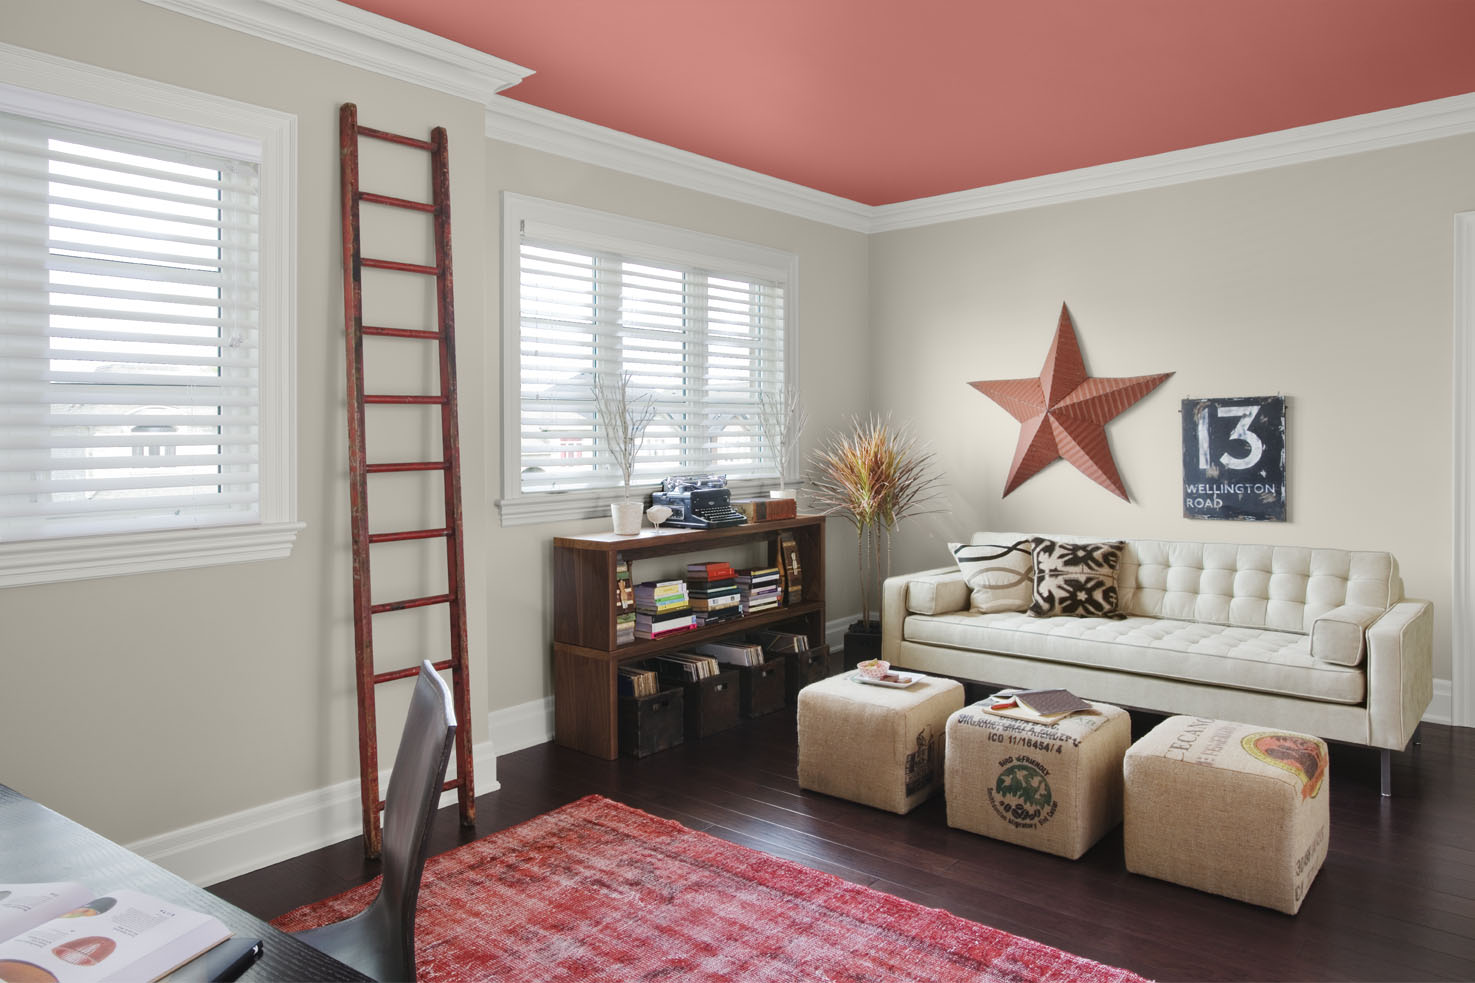 A living room with a coral painted ceiling, grey walls, white sofa, dark brown wood floors and coral decor.